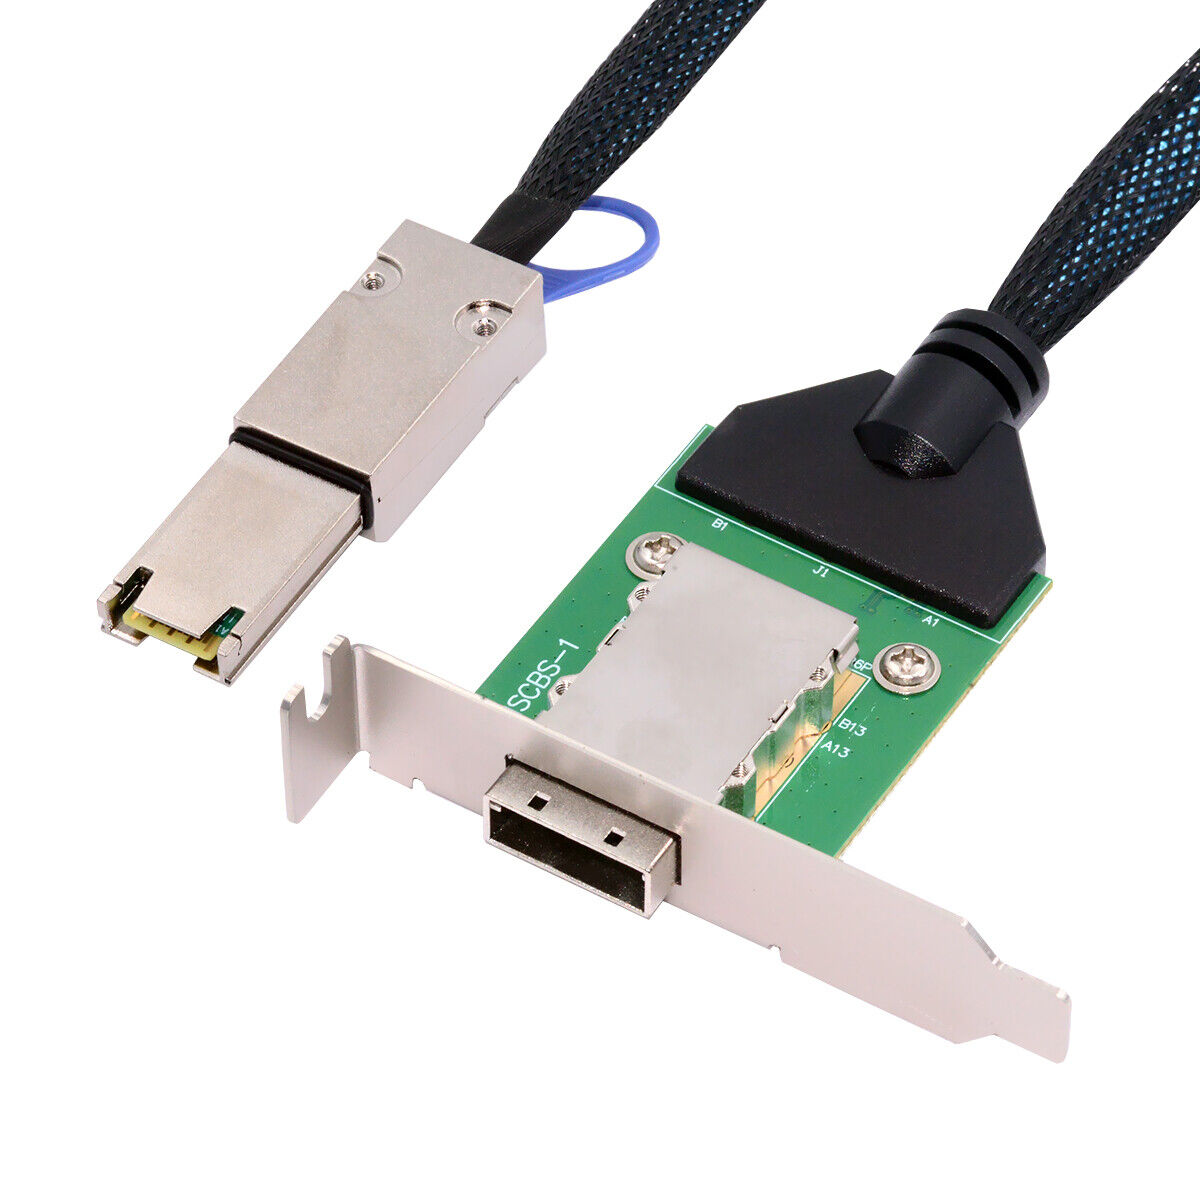 Jimier Mini SAS SFF-8088 to SFF-8088 26Pin External Extension Data Cable